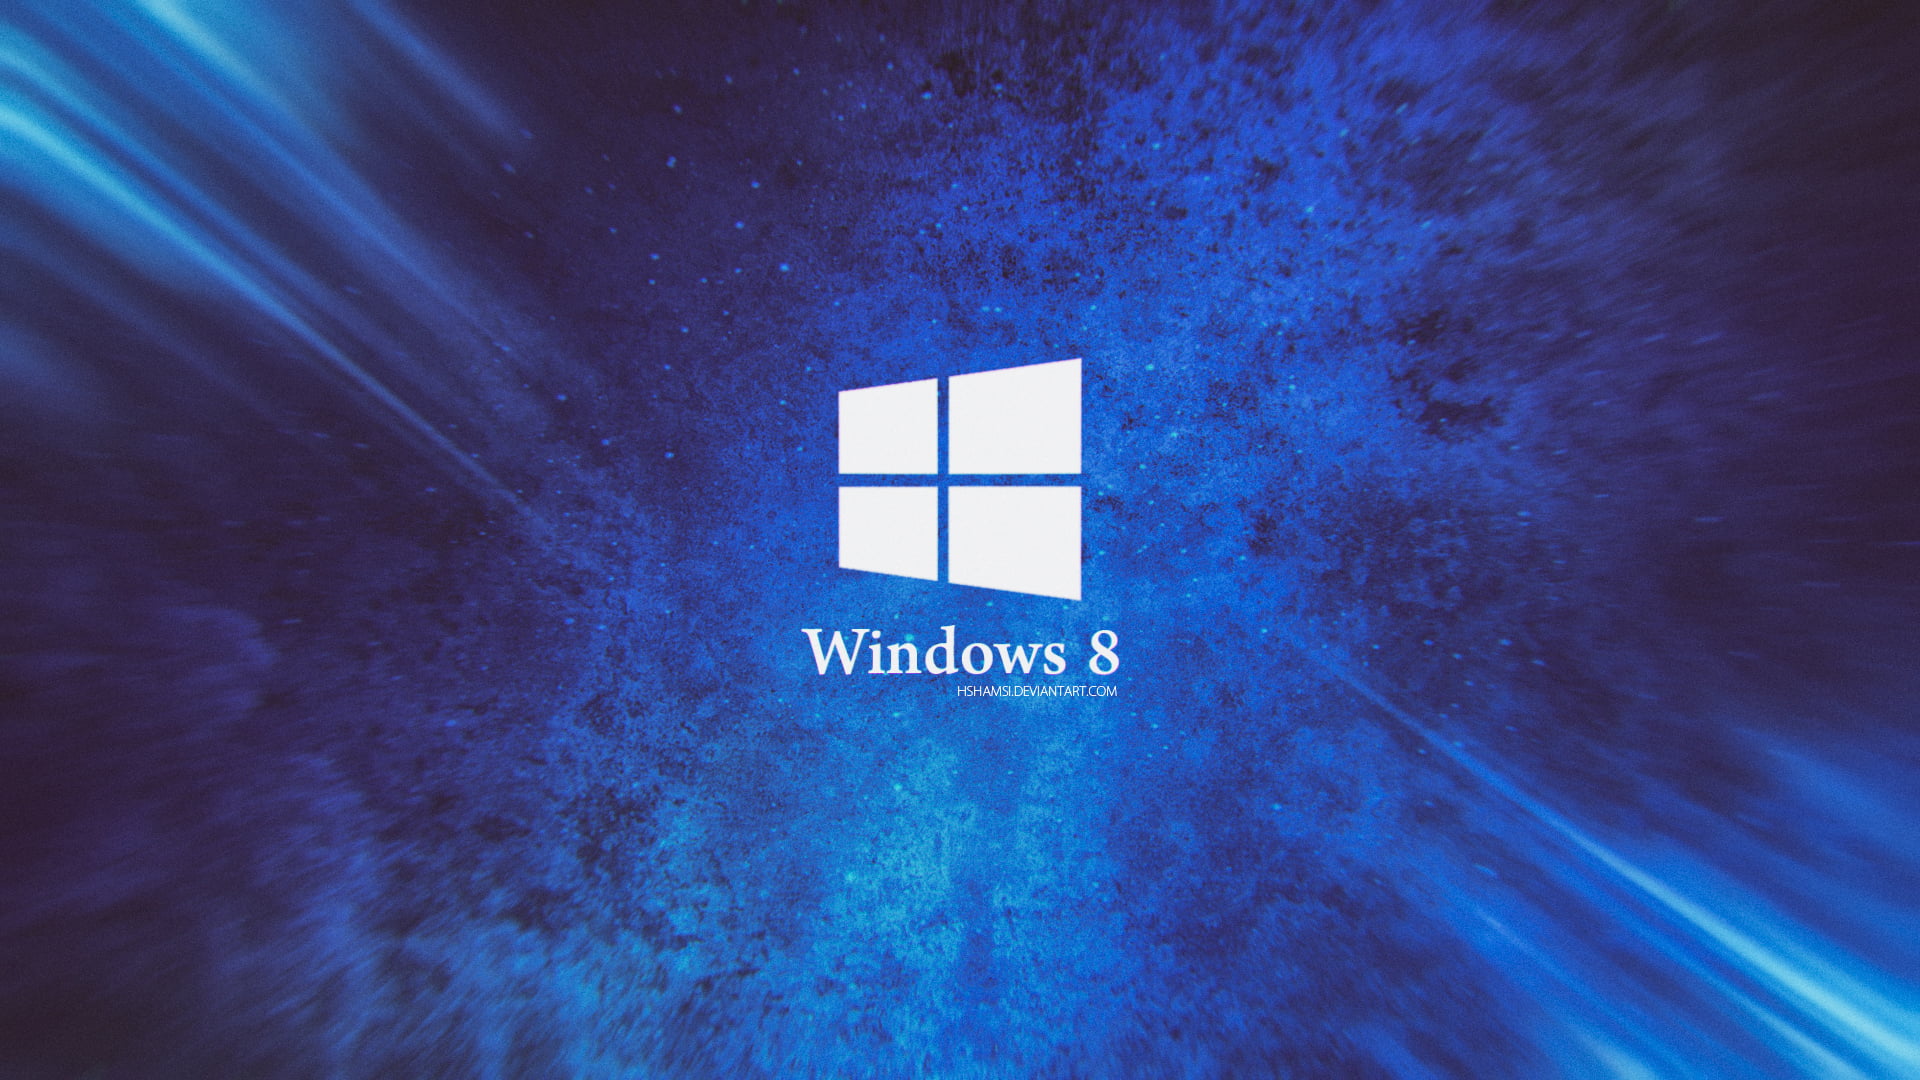 Windows 8 wallpaper, background, operating system, icon, win 8